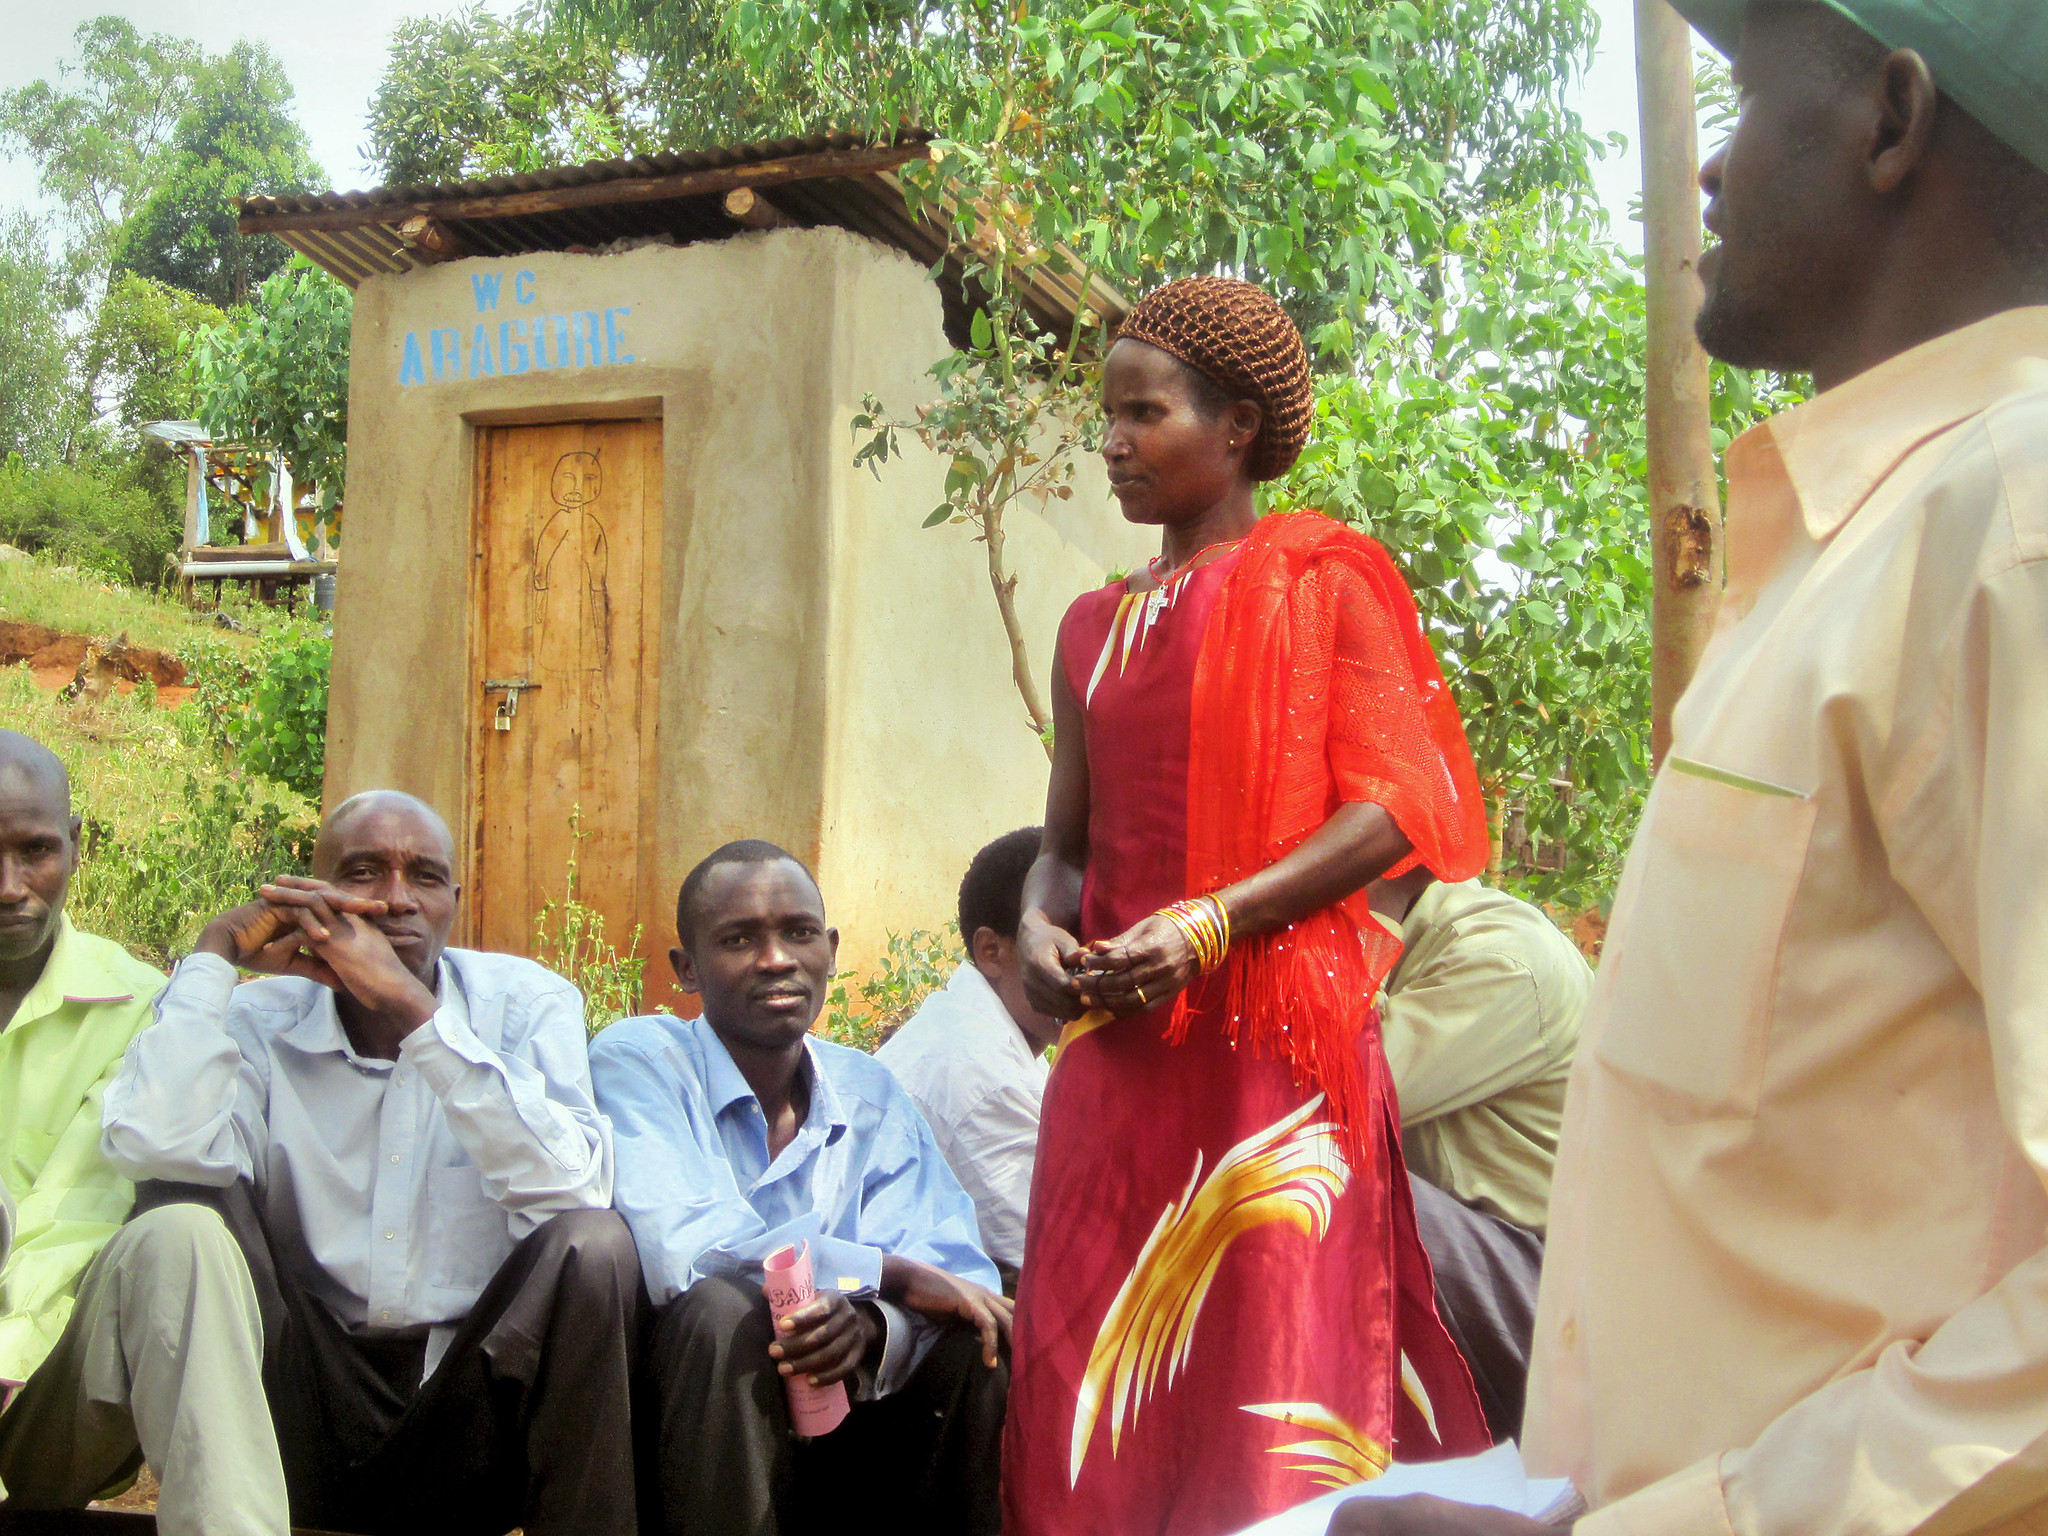 Juvenal Bamurabako (pictured right) and Tacienne Mukansengimana (pictured center), President and Vice President of the Cocamu Coffee Cooperative, lead a meeting of gathered members.